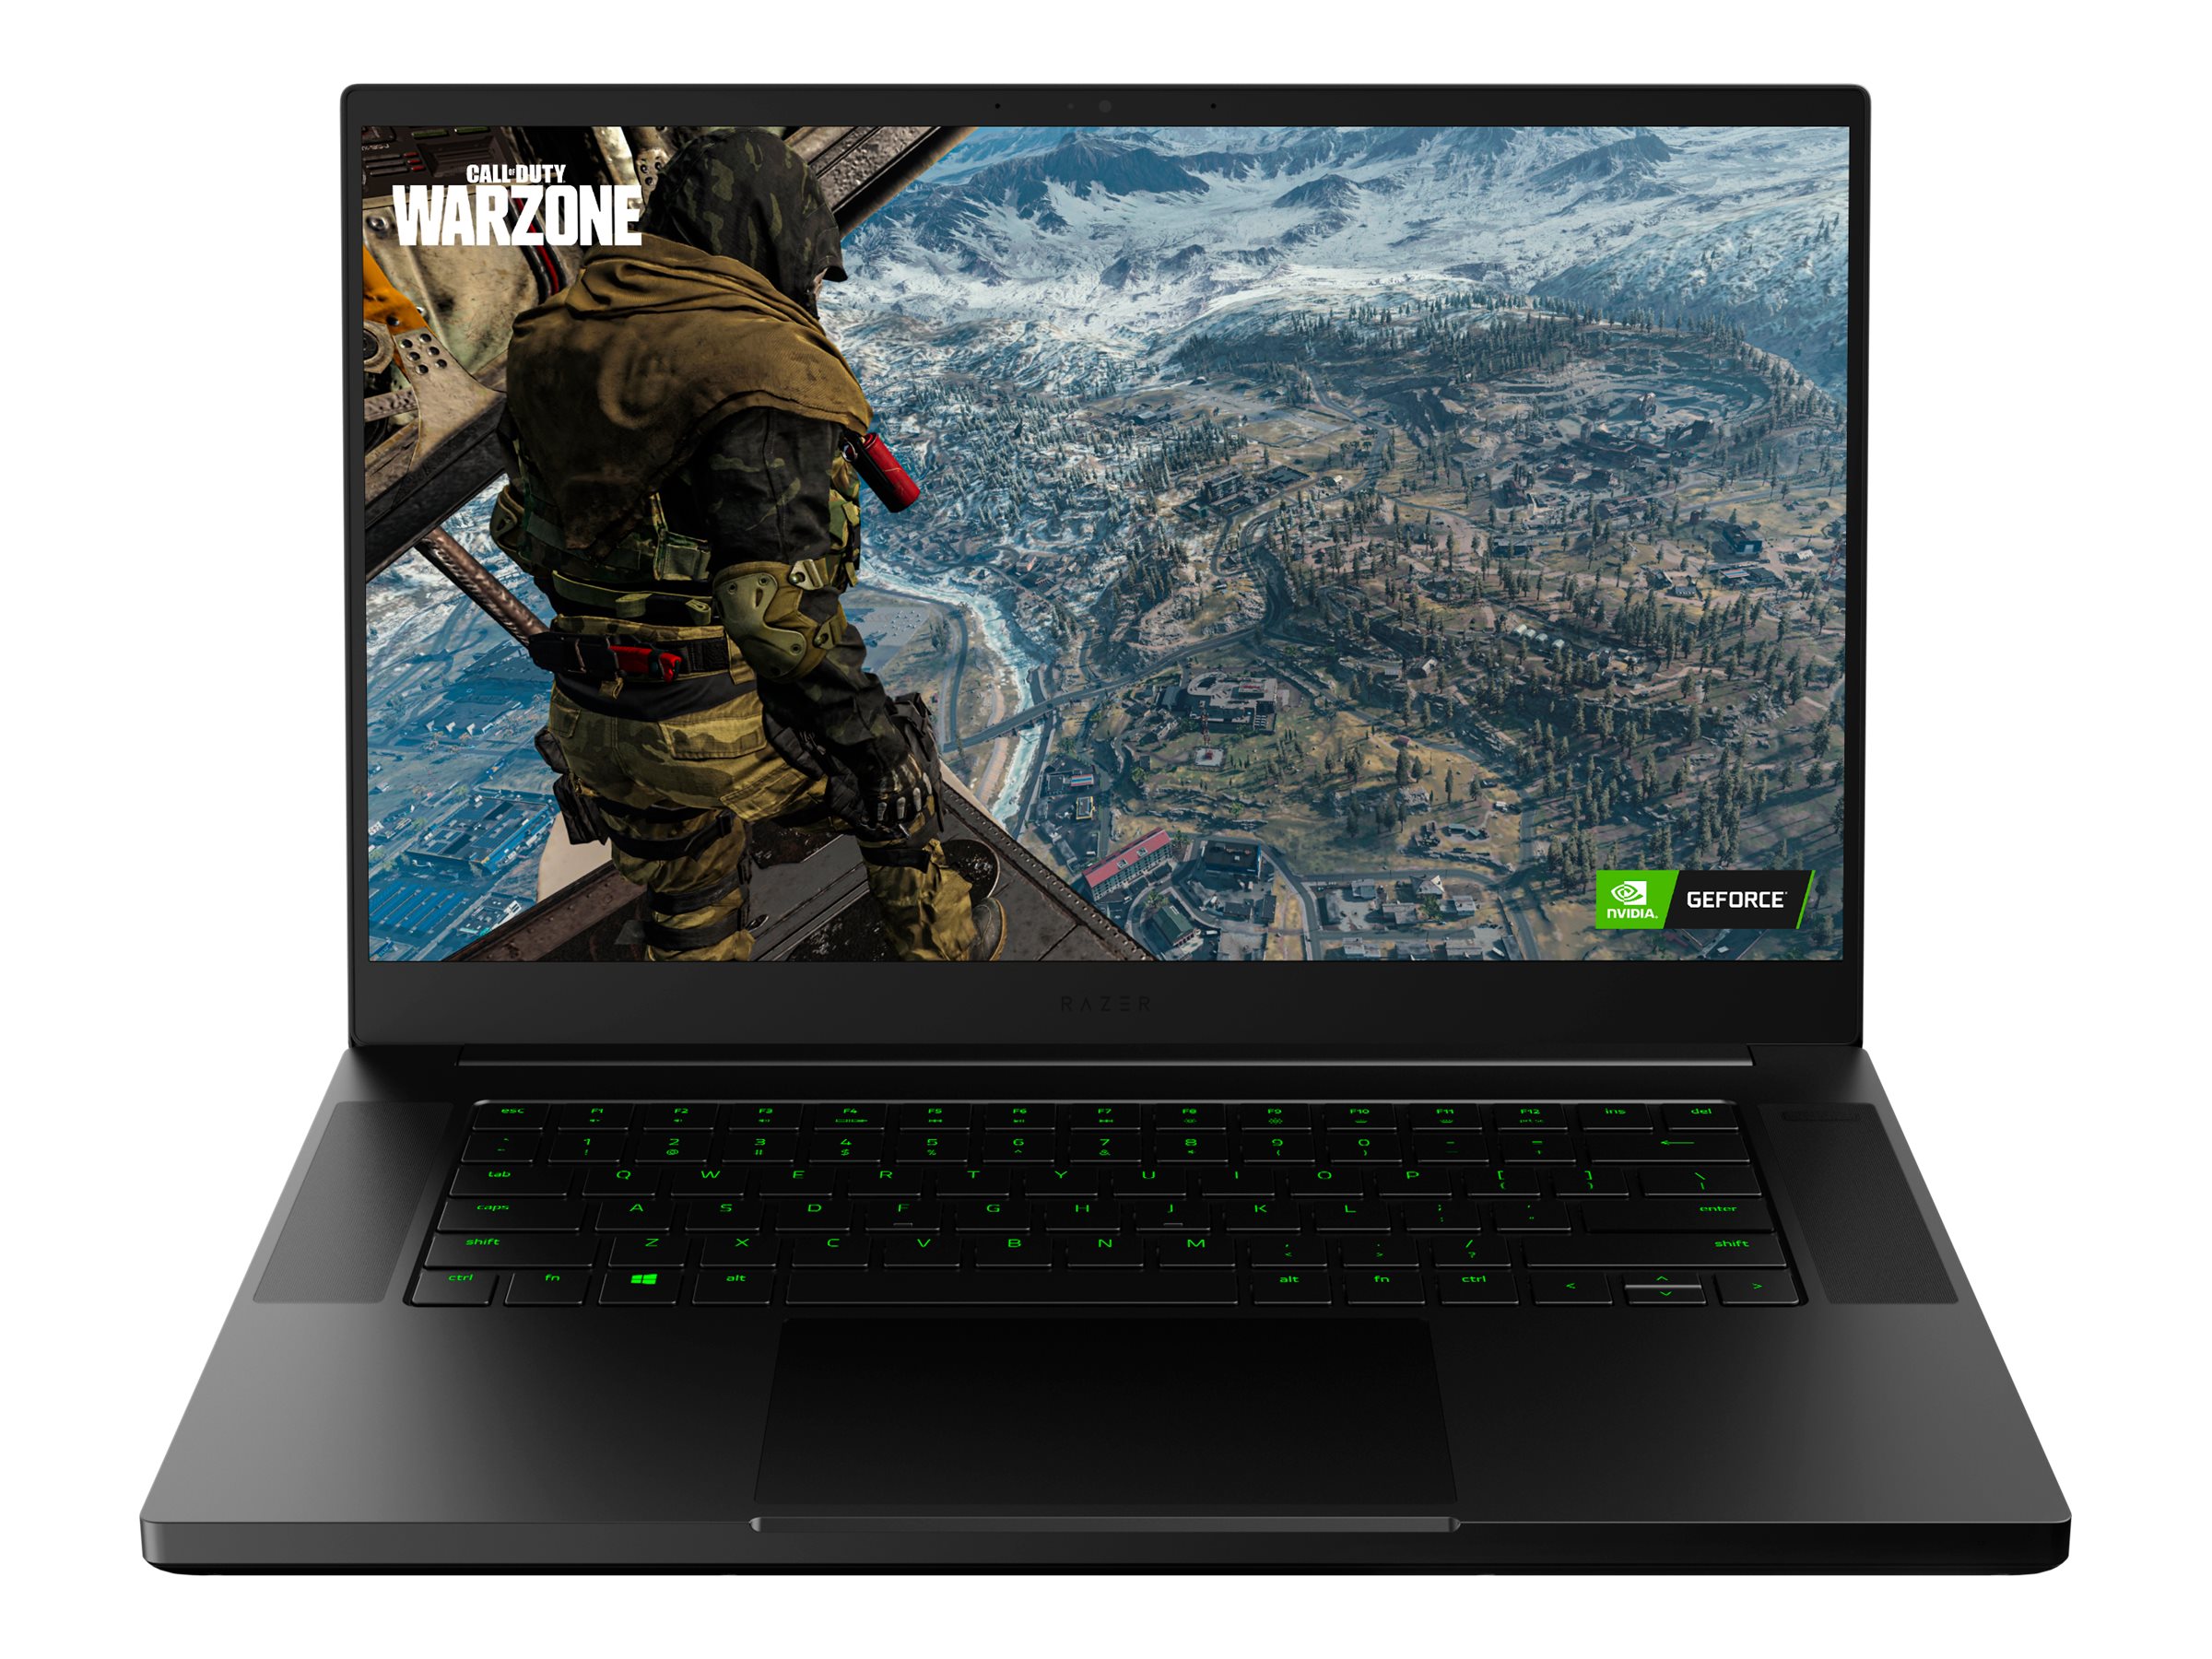 Razer Blade 15 Base - full specs, details and review